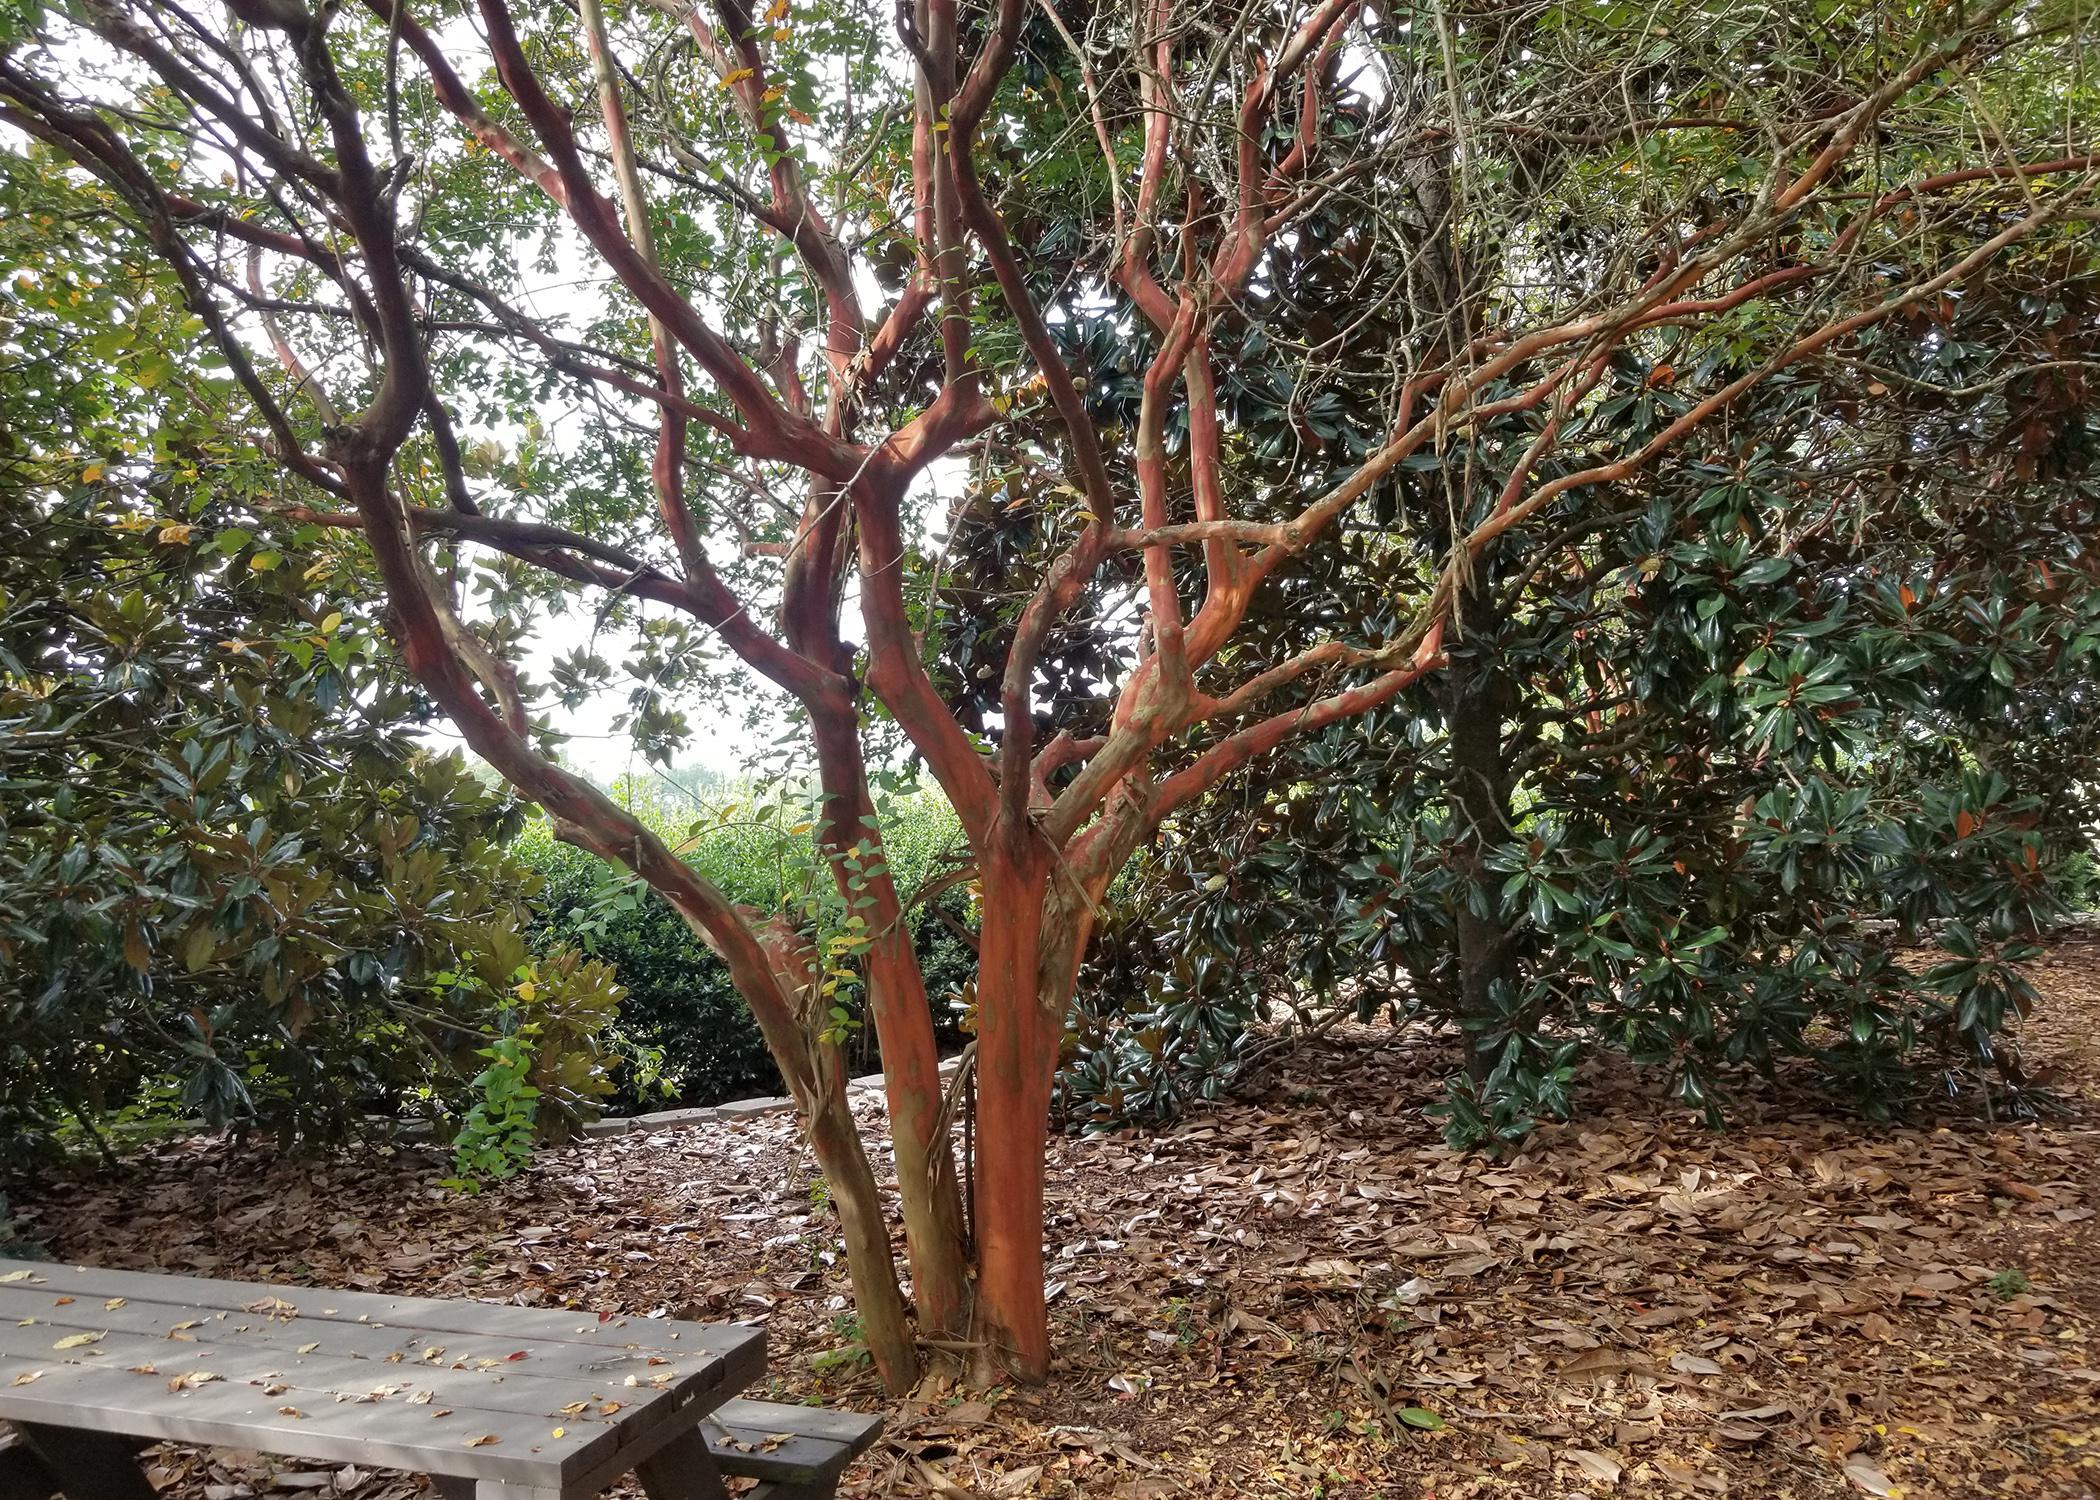 A crape myrtle in the landscape